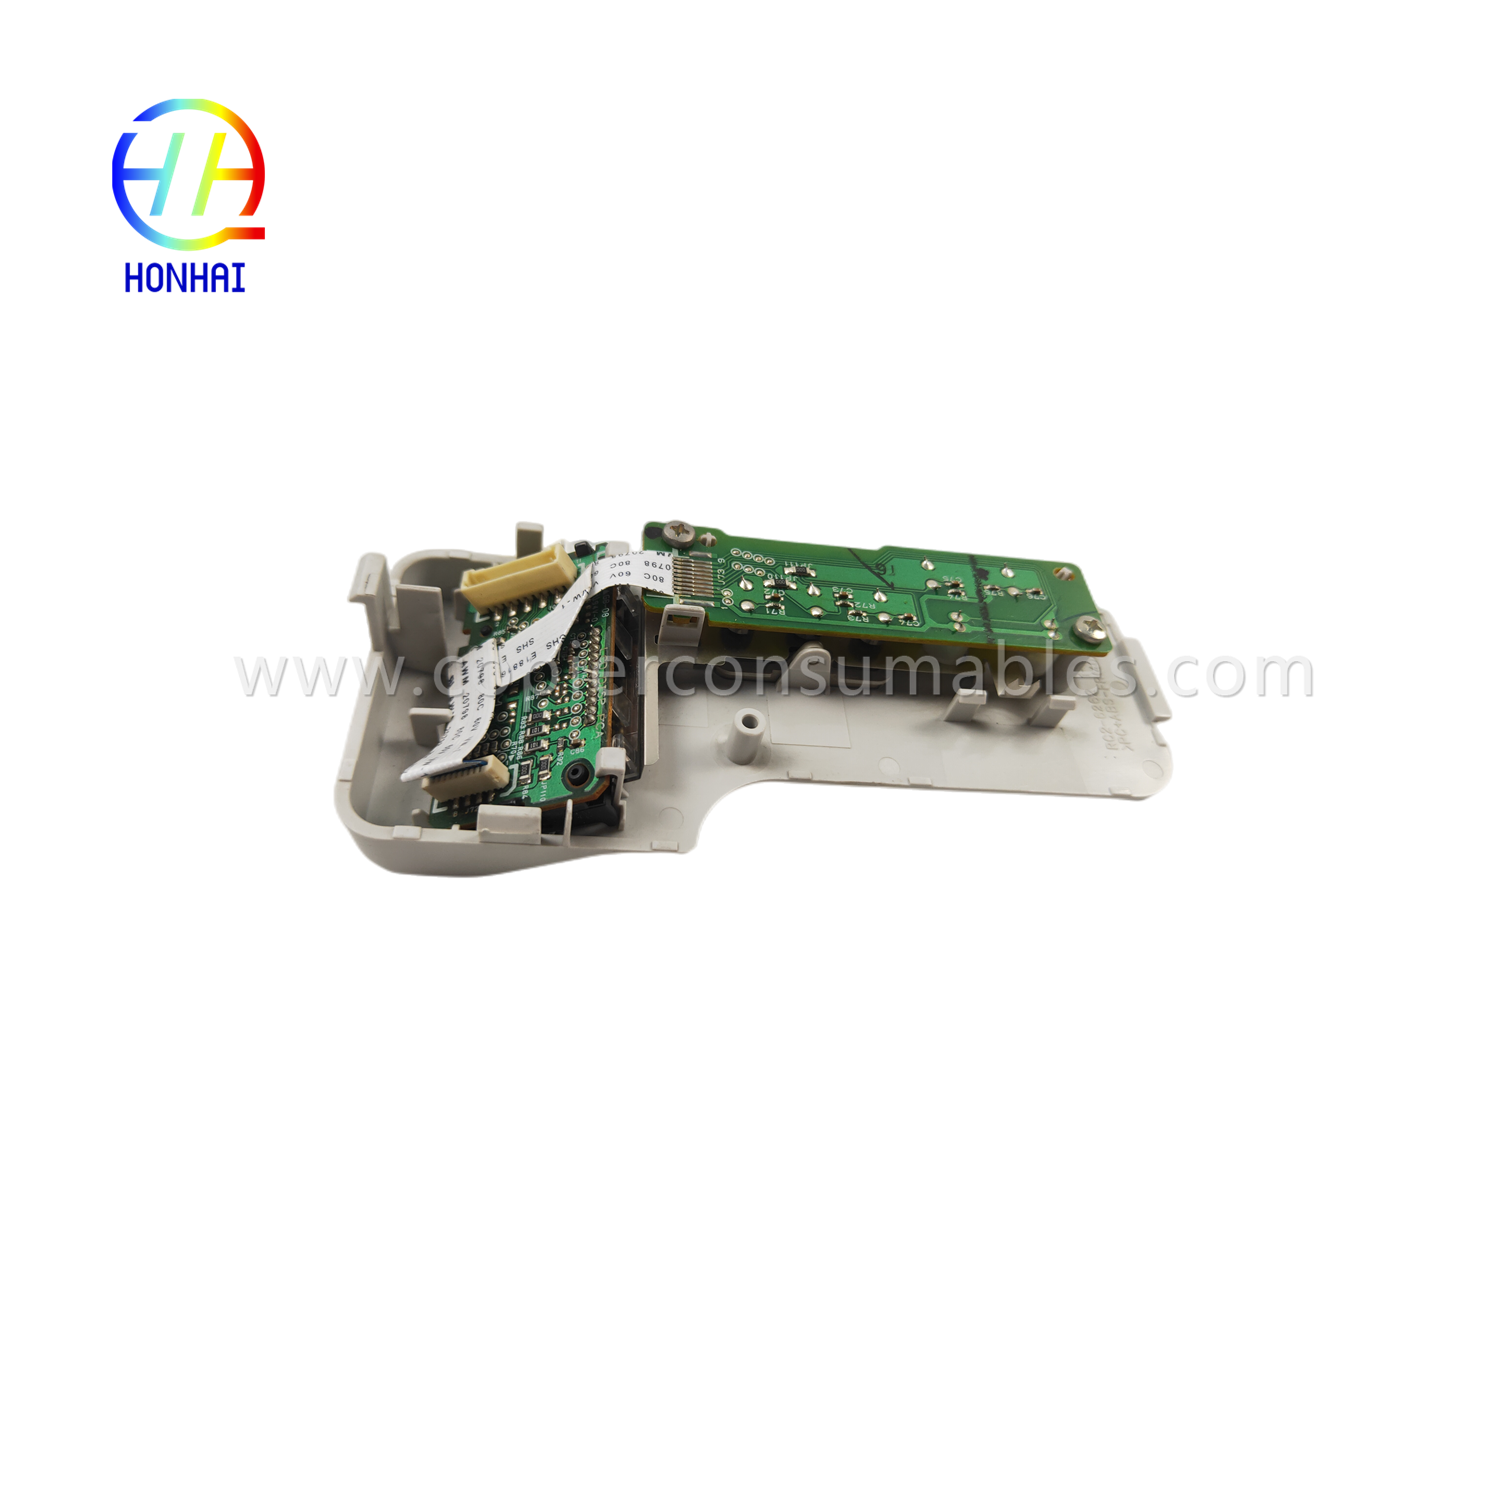 https://c585.goodo.net/control-panel-display-for-hp-rc2-6262-p2030-p2035-p2055dn-product/